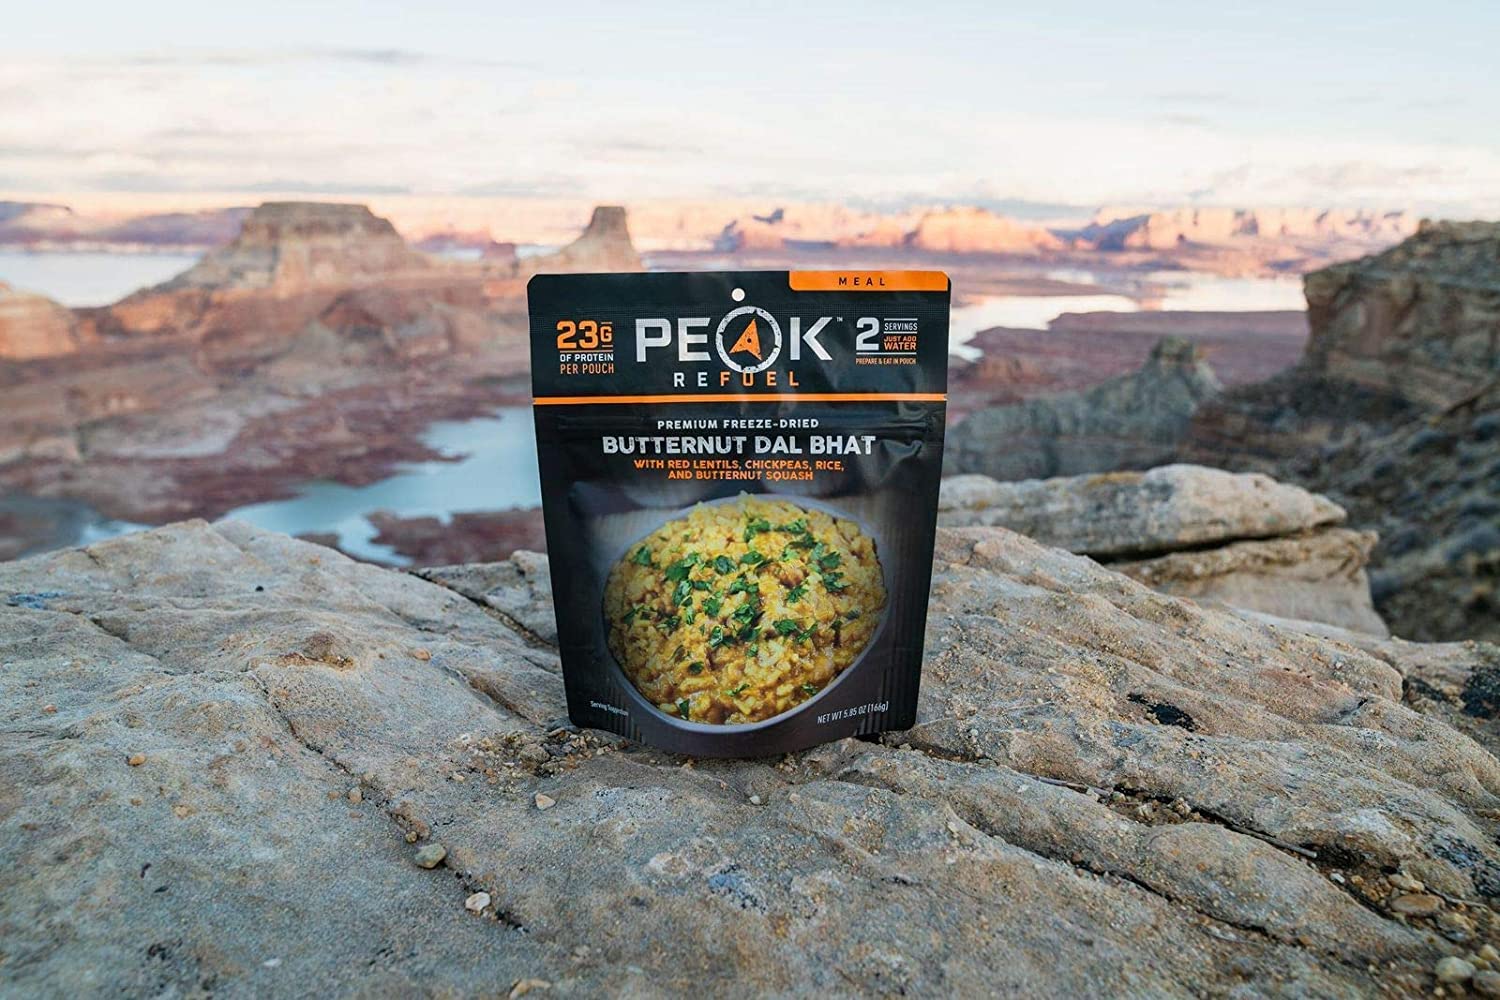 A bag of Peak Refuel Freeze-Dried Breakfast, Lunch, and Dinner Sampler Food Storage and Backpacking Food Kit - (SHIPS IN 1-2 WEEKS) sitting on top of a rocky cliff.